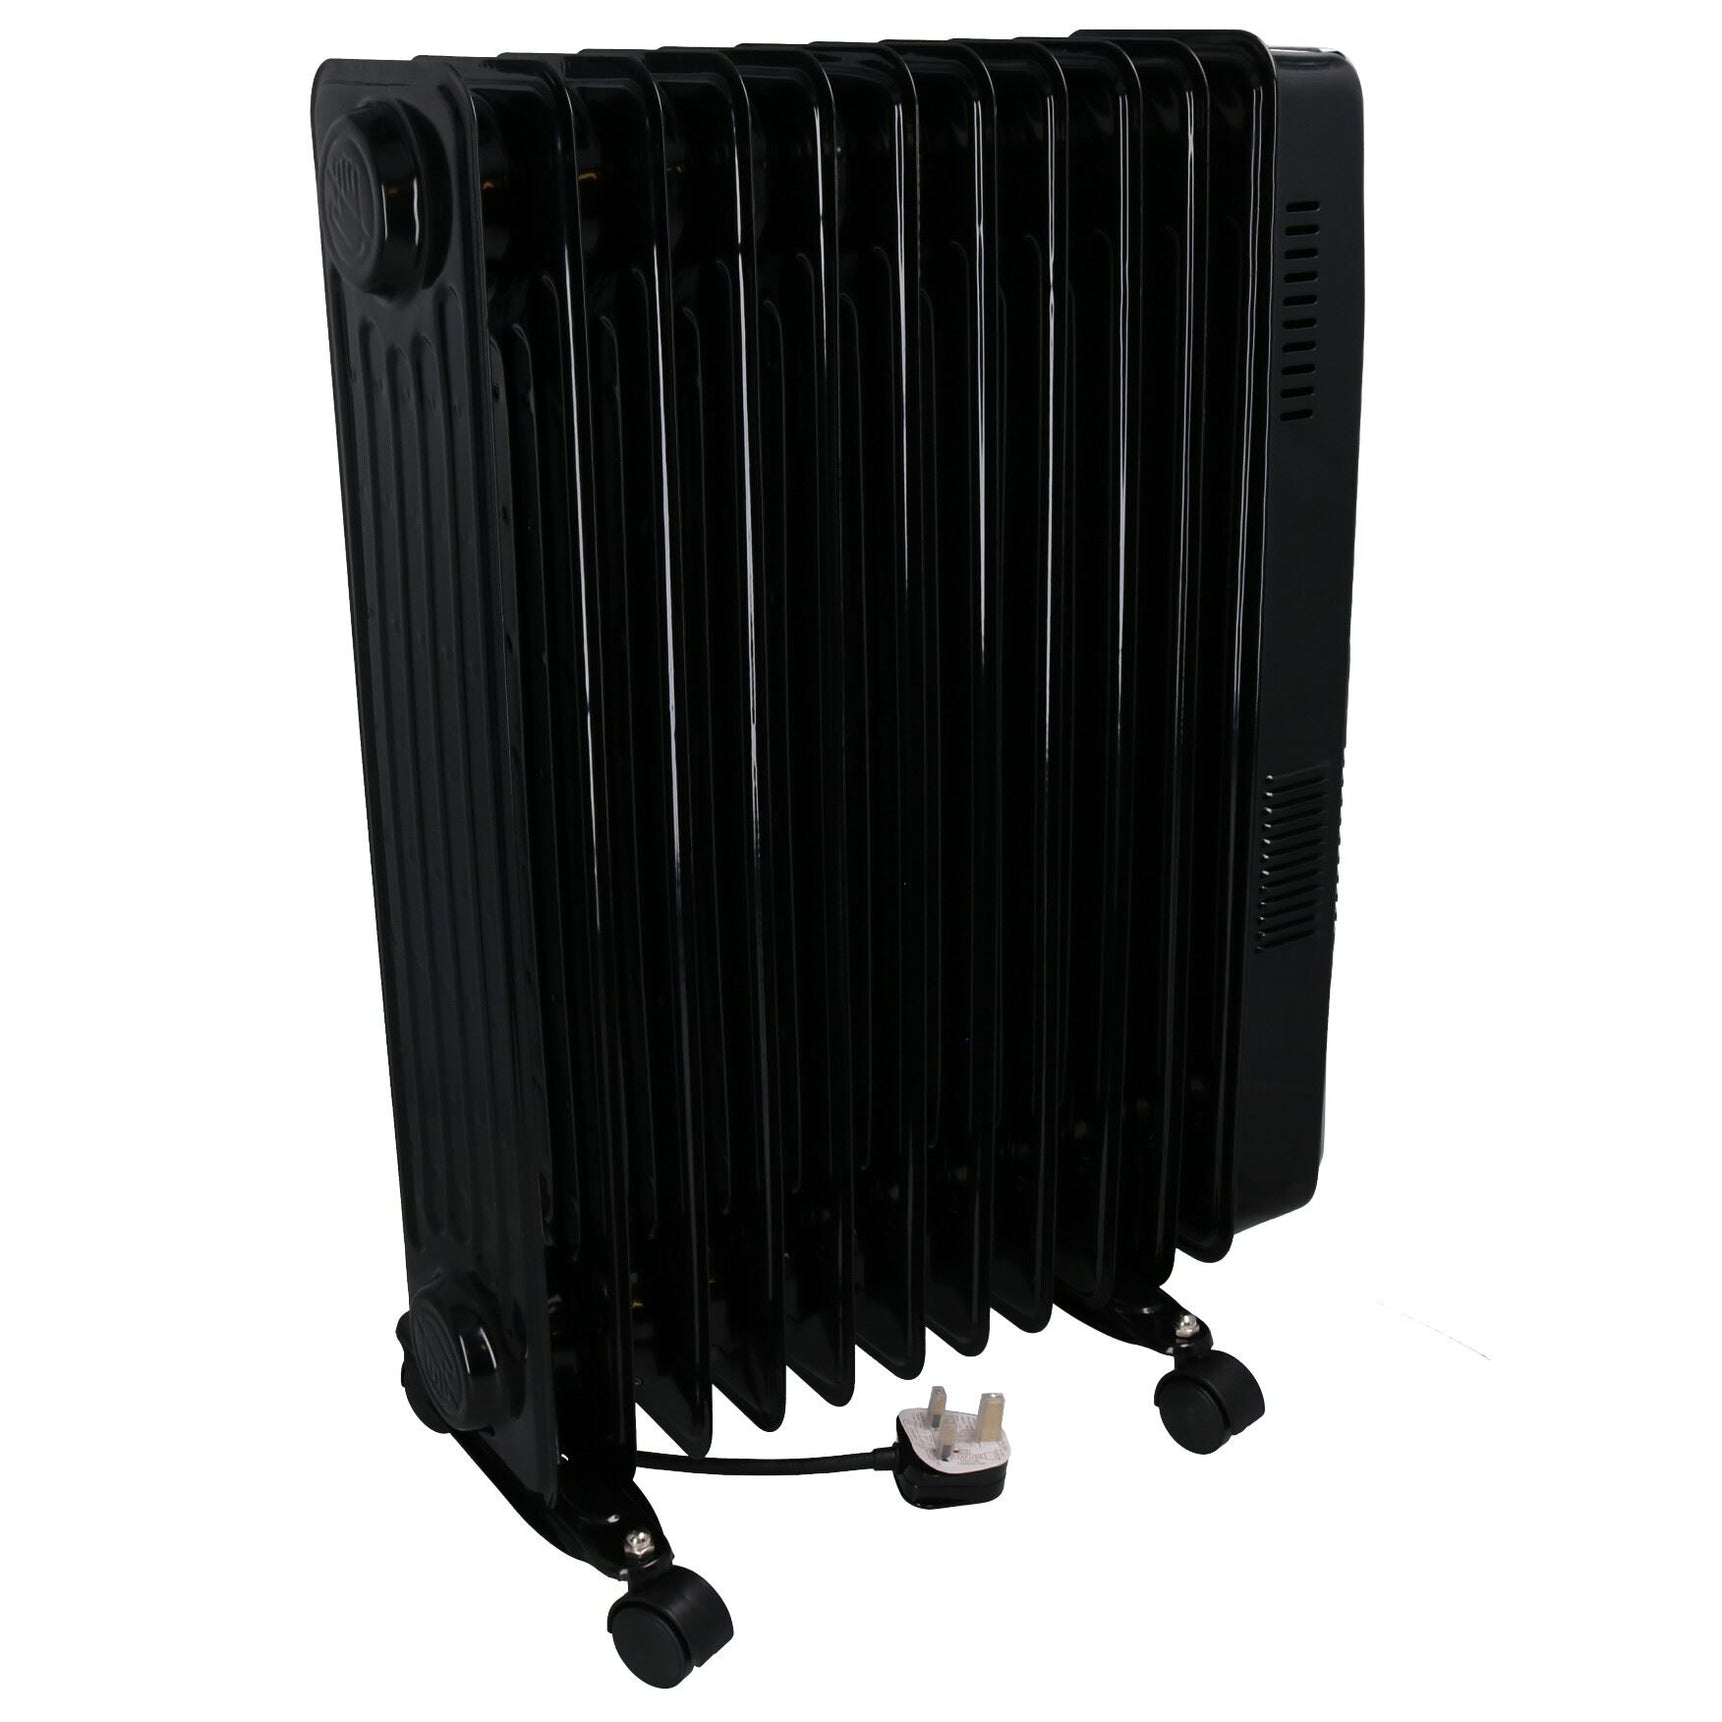 2KW 11 Fin Oil Filled Portable Electric Radiator Heater with Turbo fan + 24hr Timer